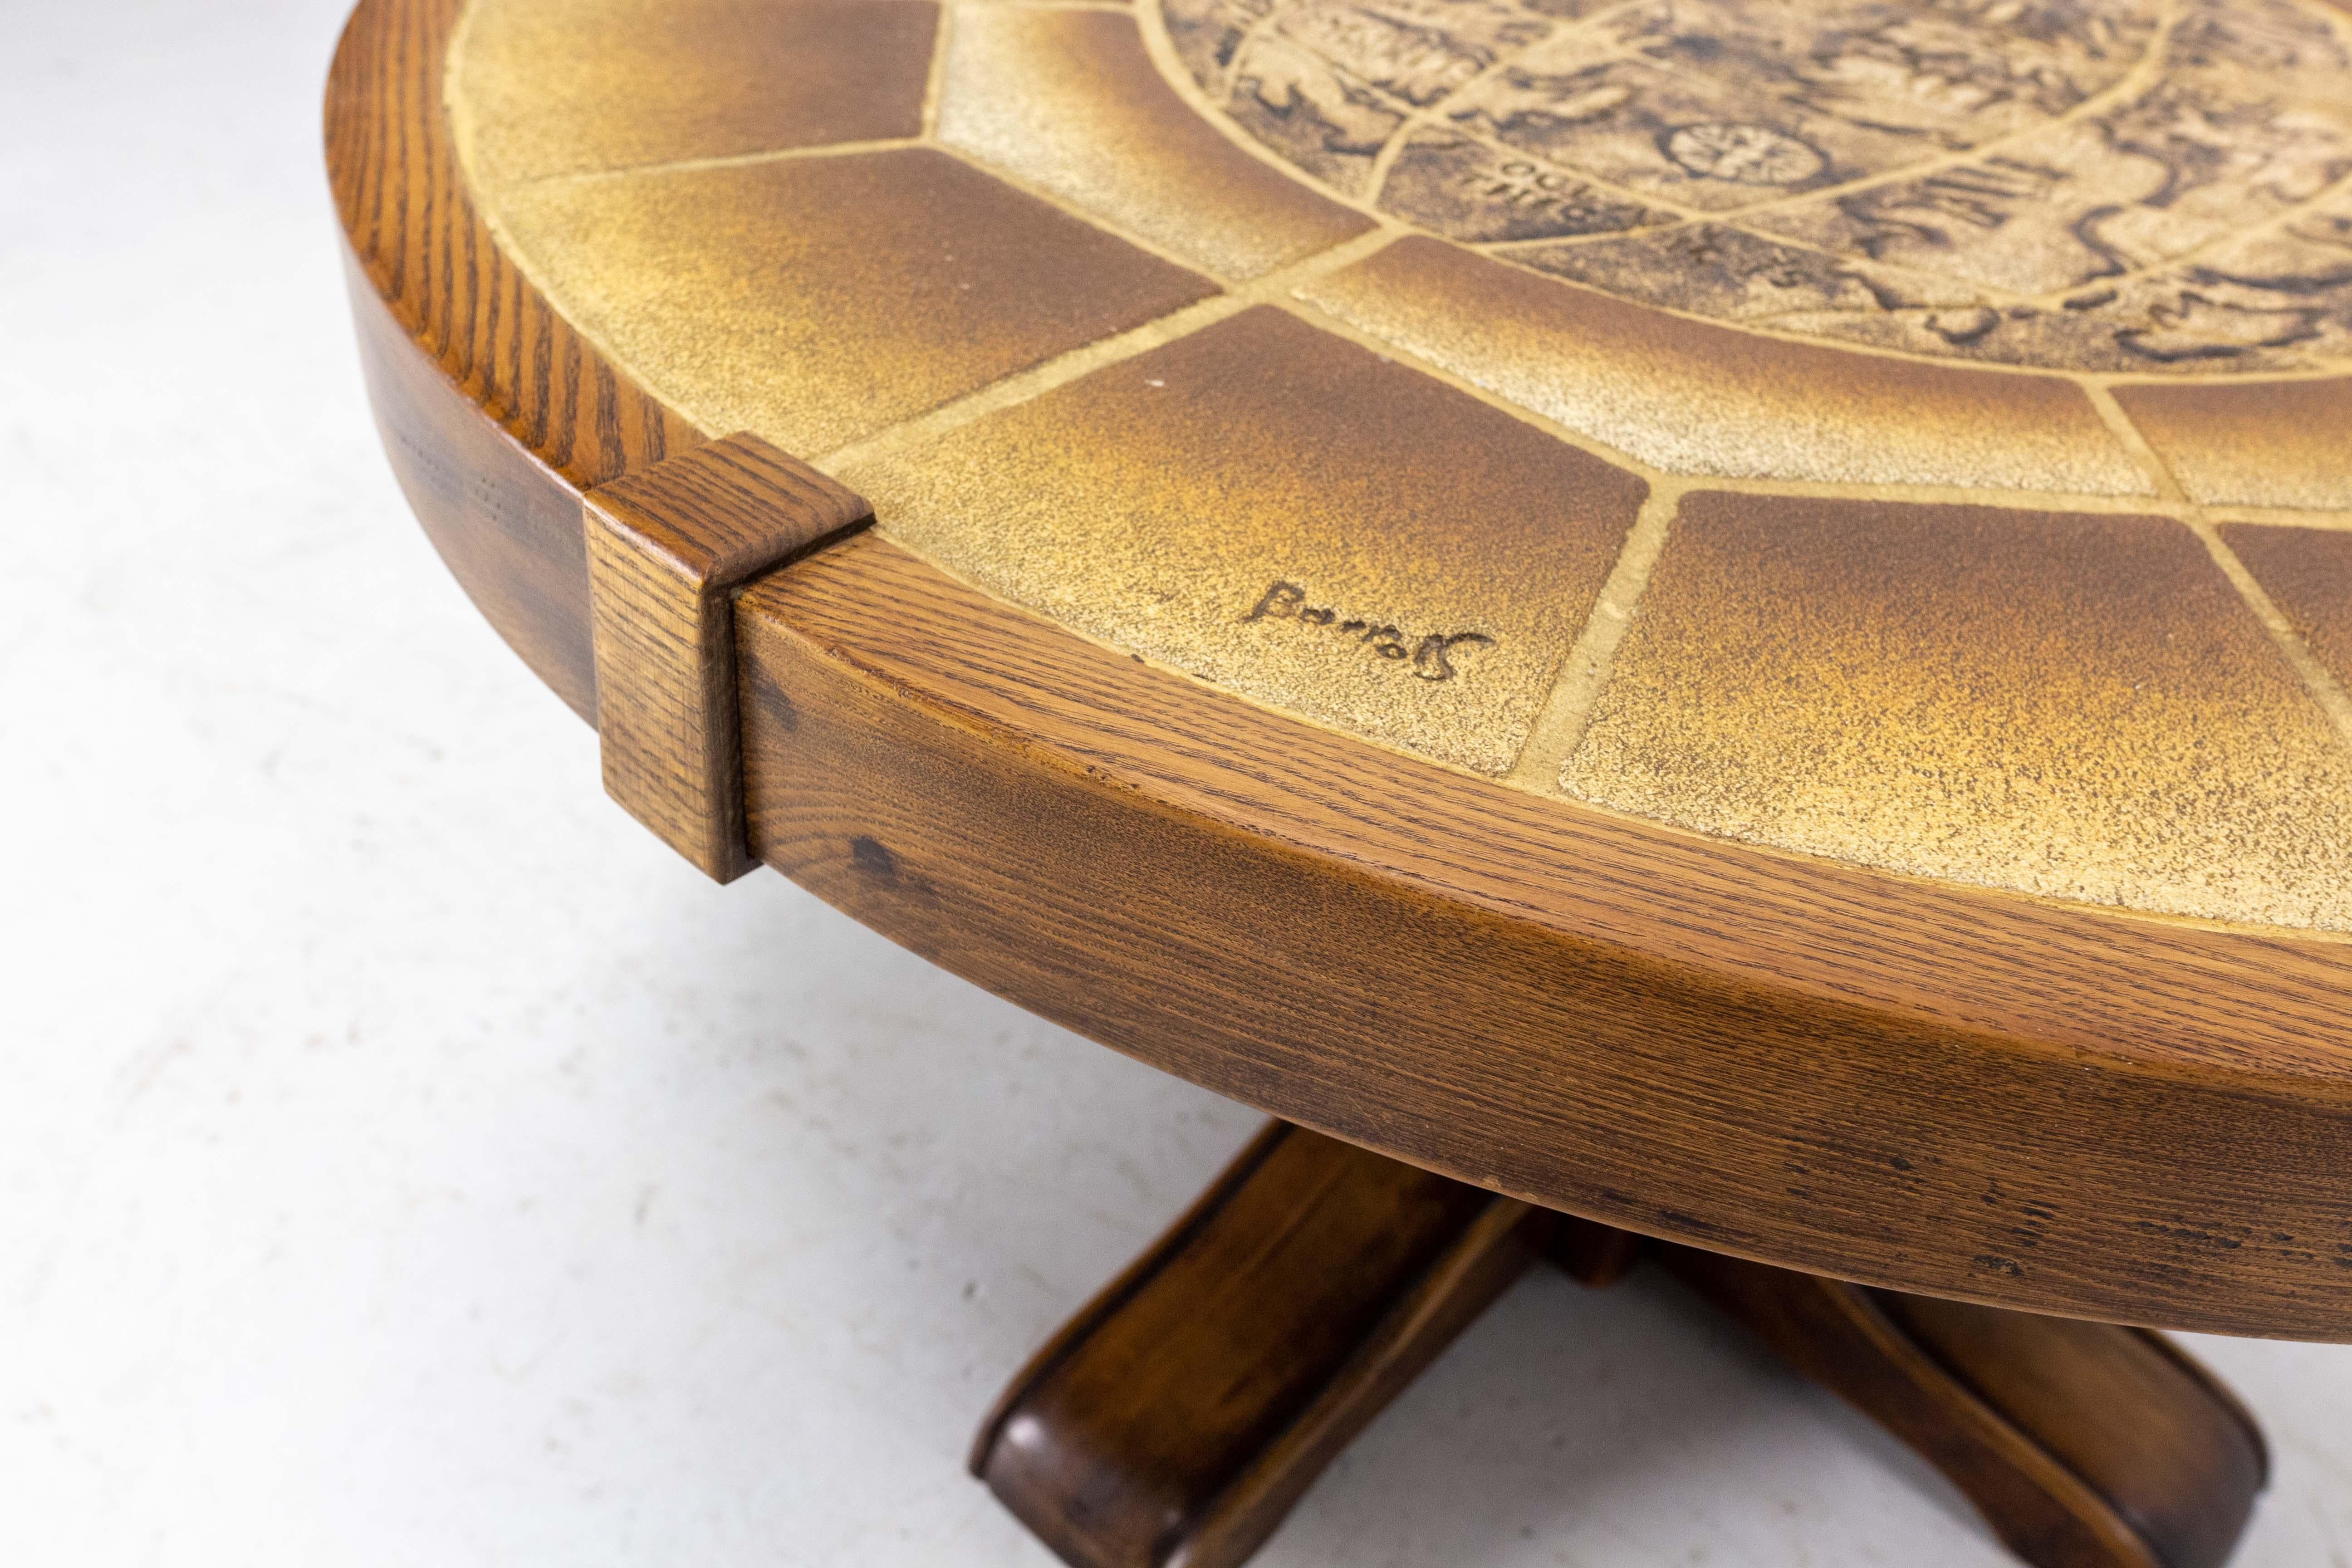 French Round Coffee Table with Vallauris Ceramic World Representation, c. 1970 For Sale 3